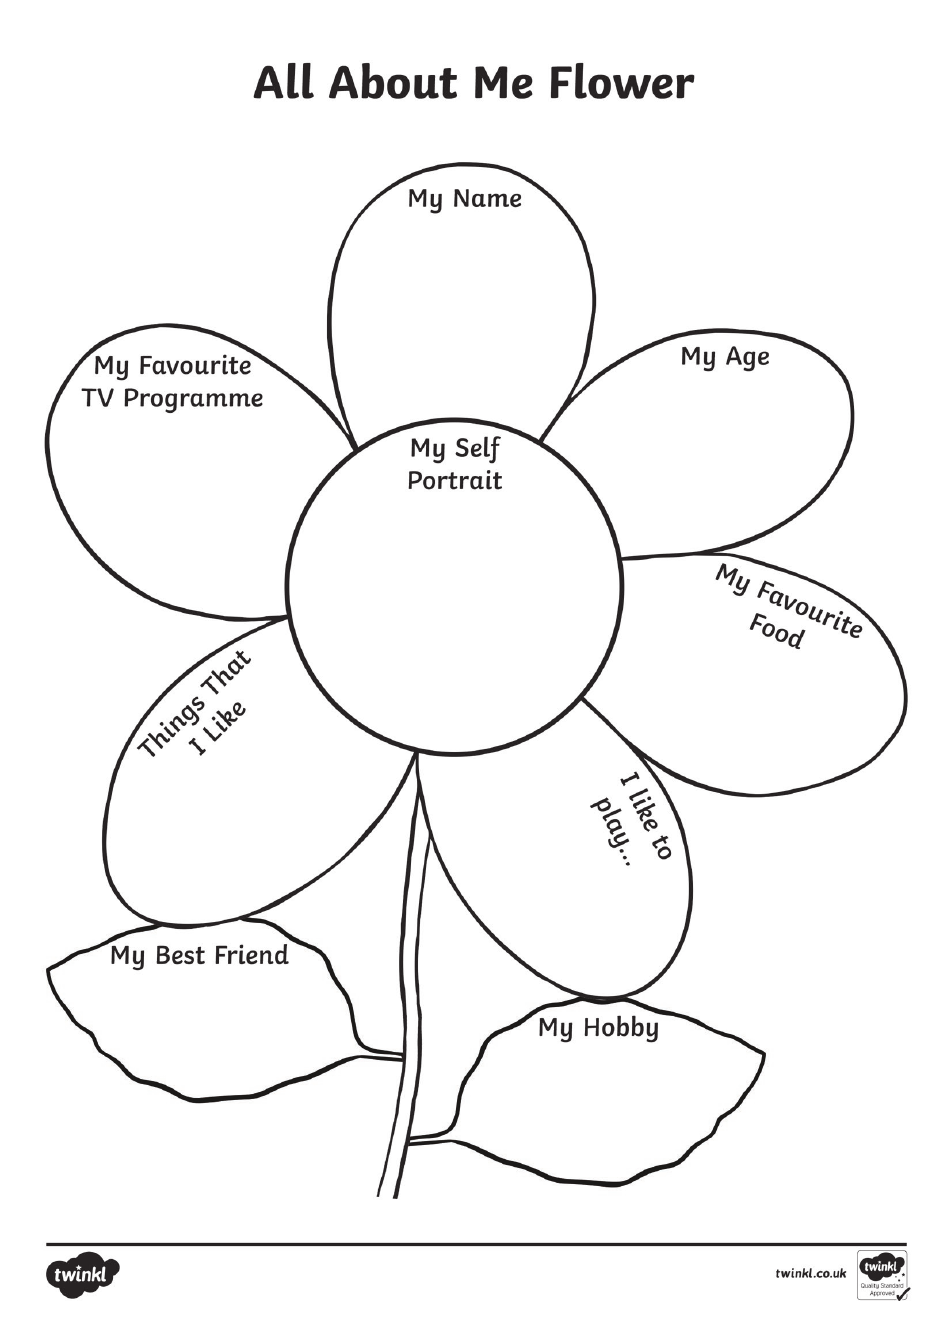 All About Me Flower Template - Document